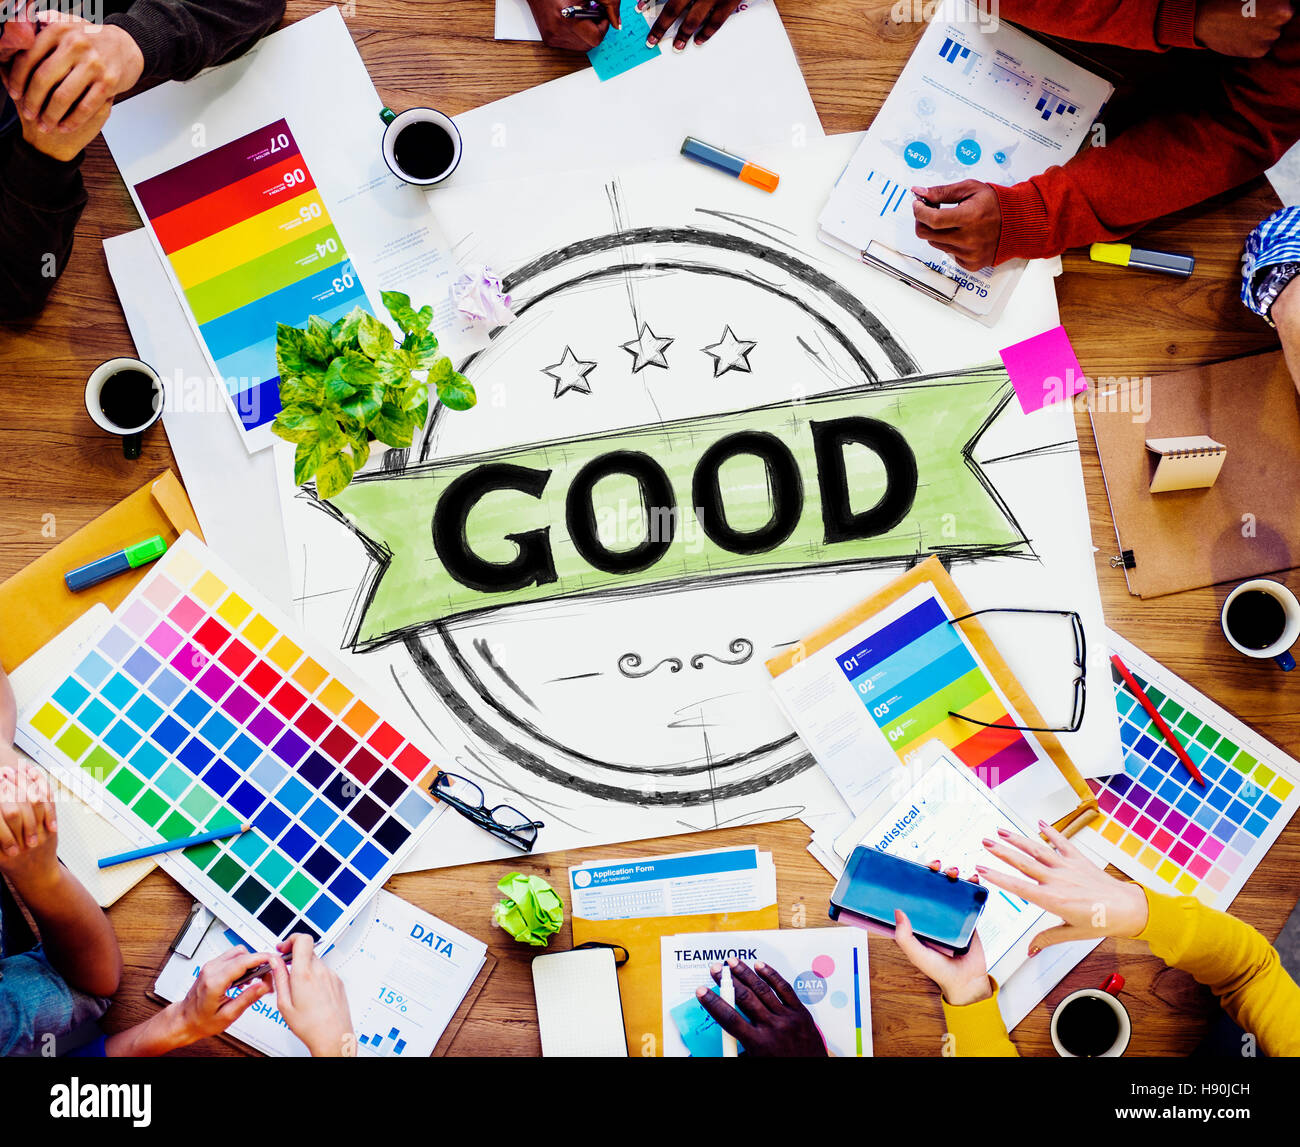 Good Excellent Success Positive Thinking Concept Stock Photo